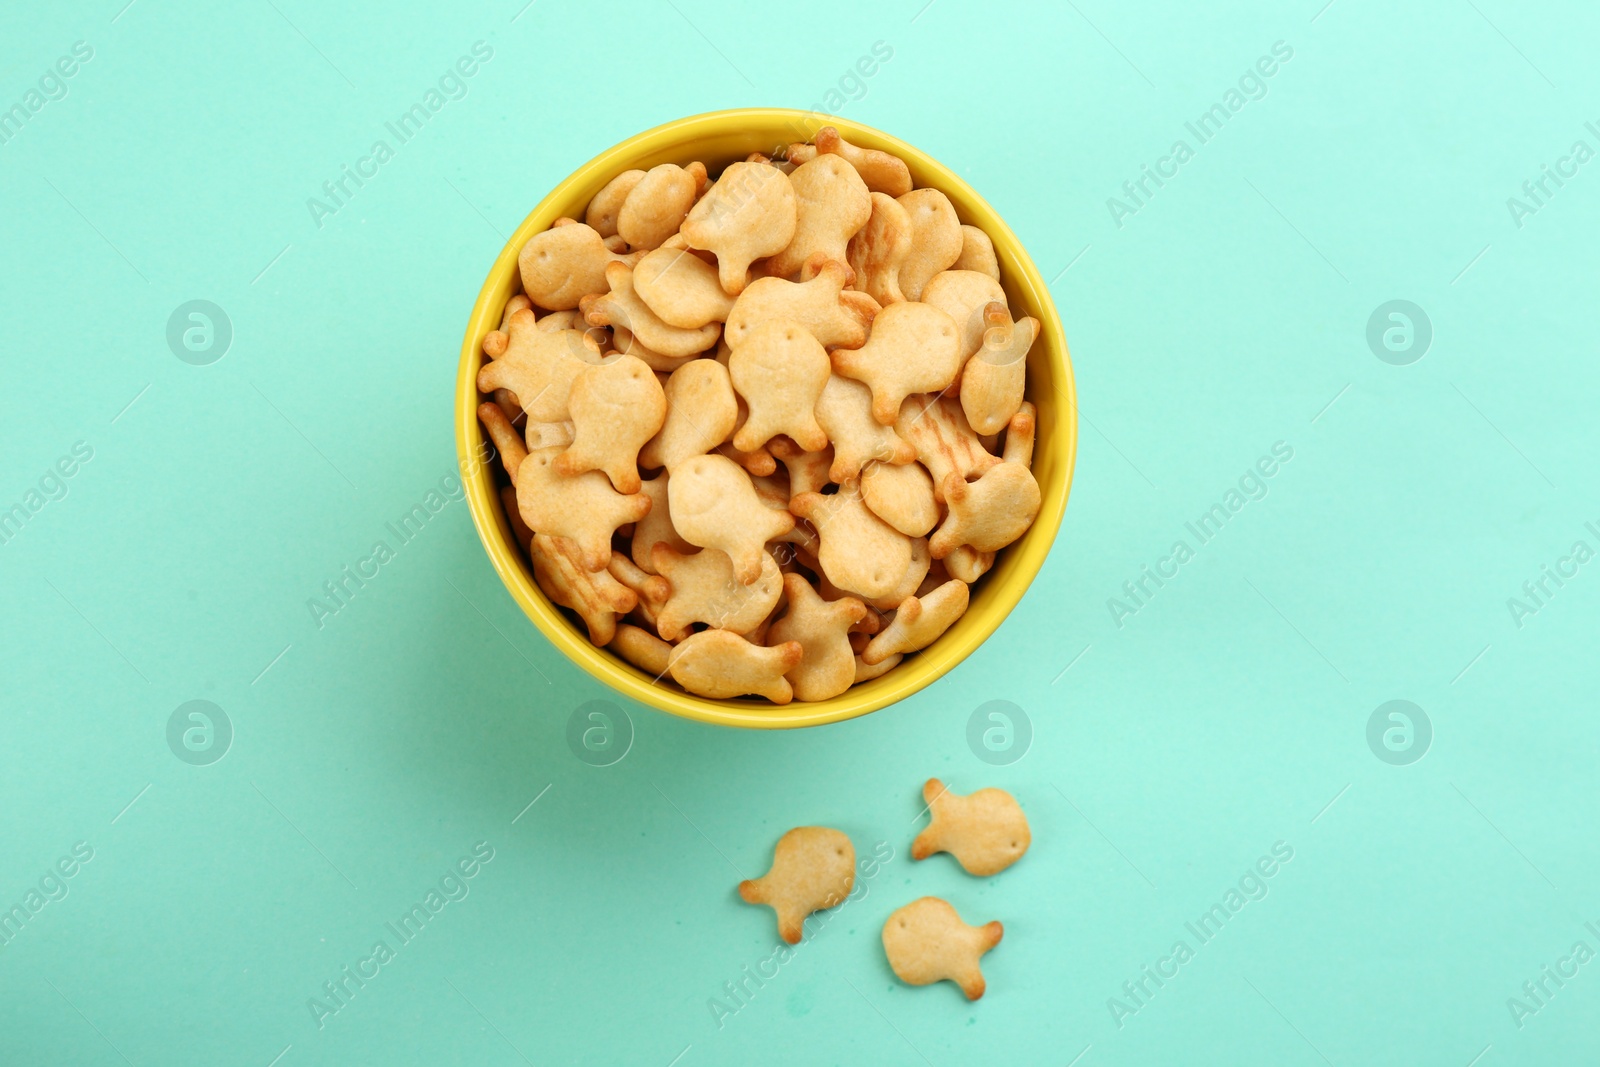 Photo of Delicious goldfish crackers in bowl on turquoise background, flat lay